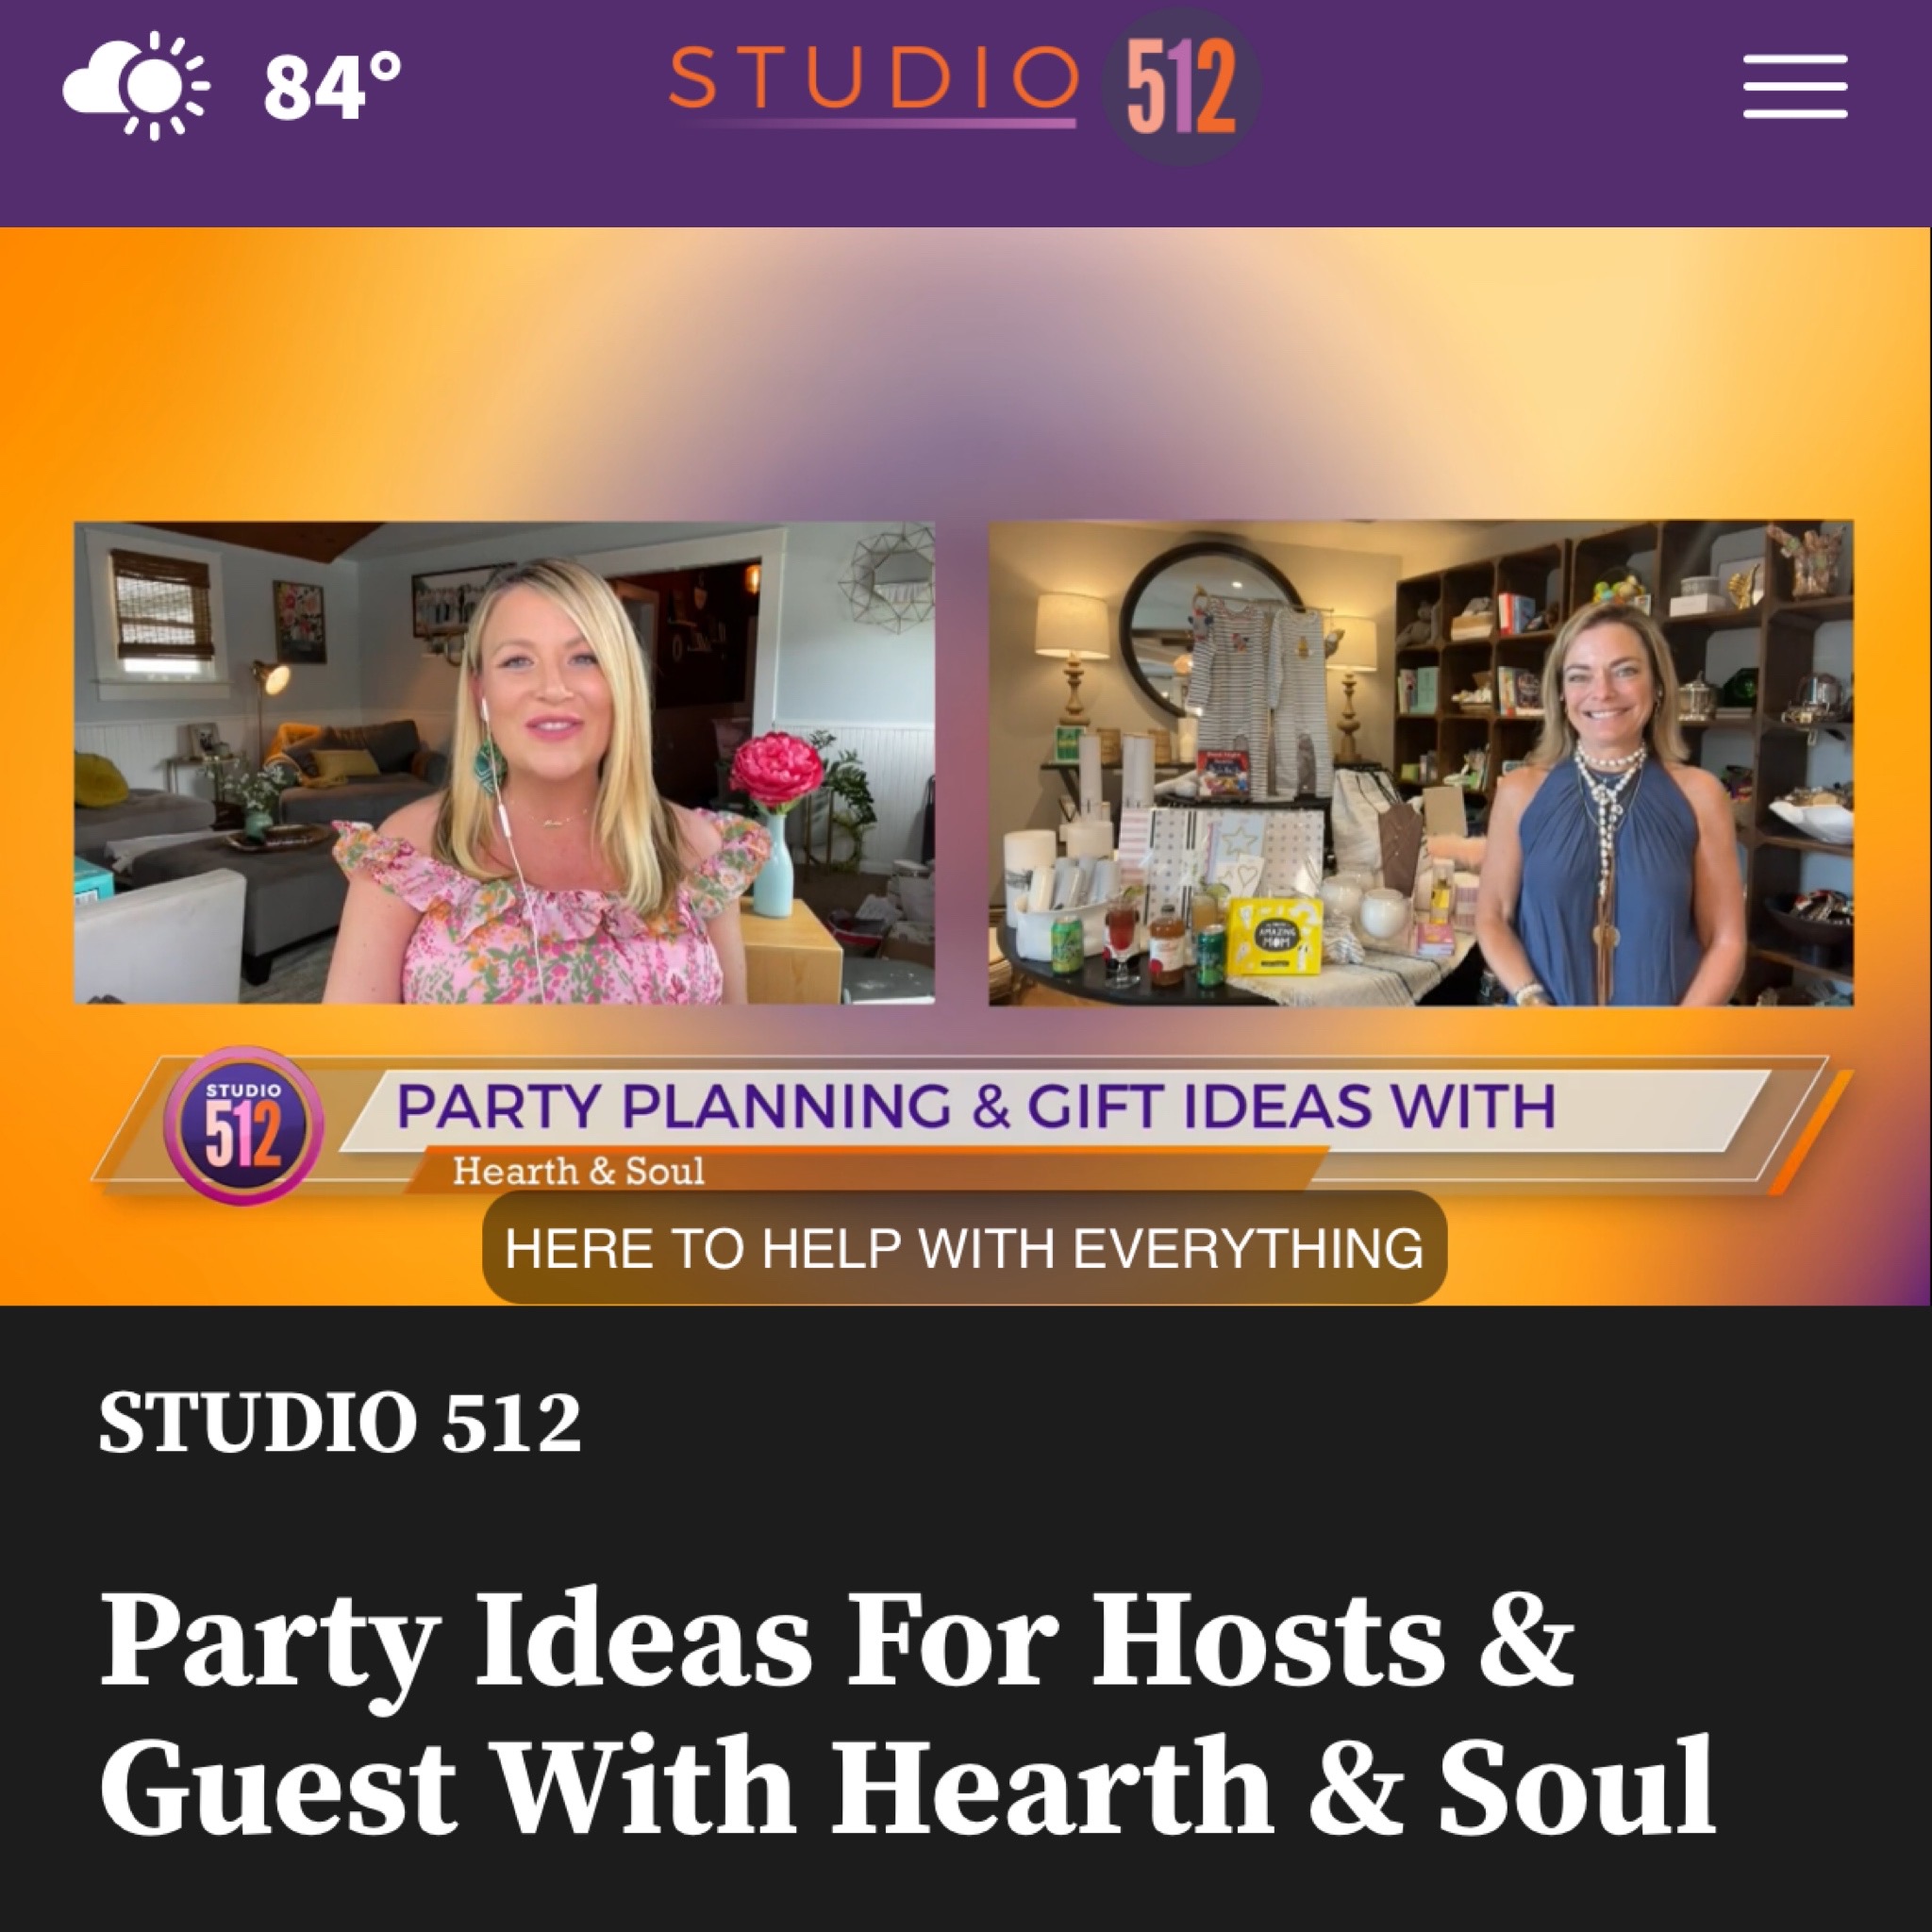 Party Ideas for Hosts and Guests with Hearth and Soul